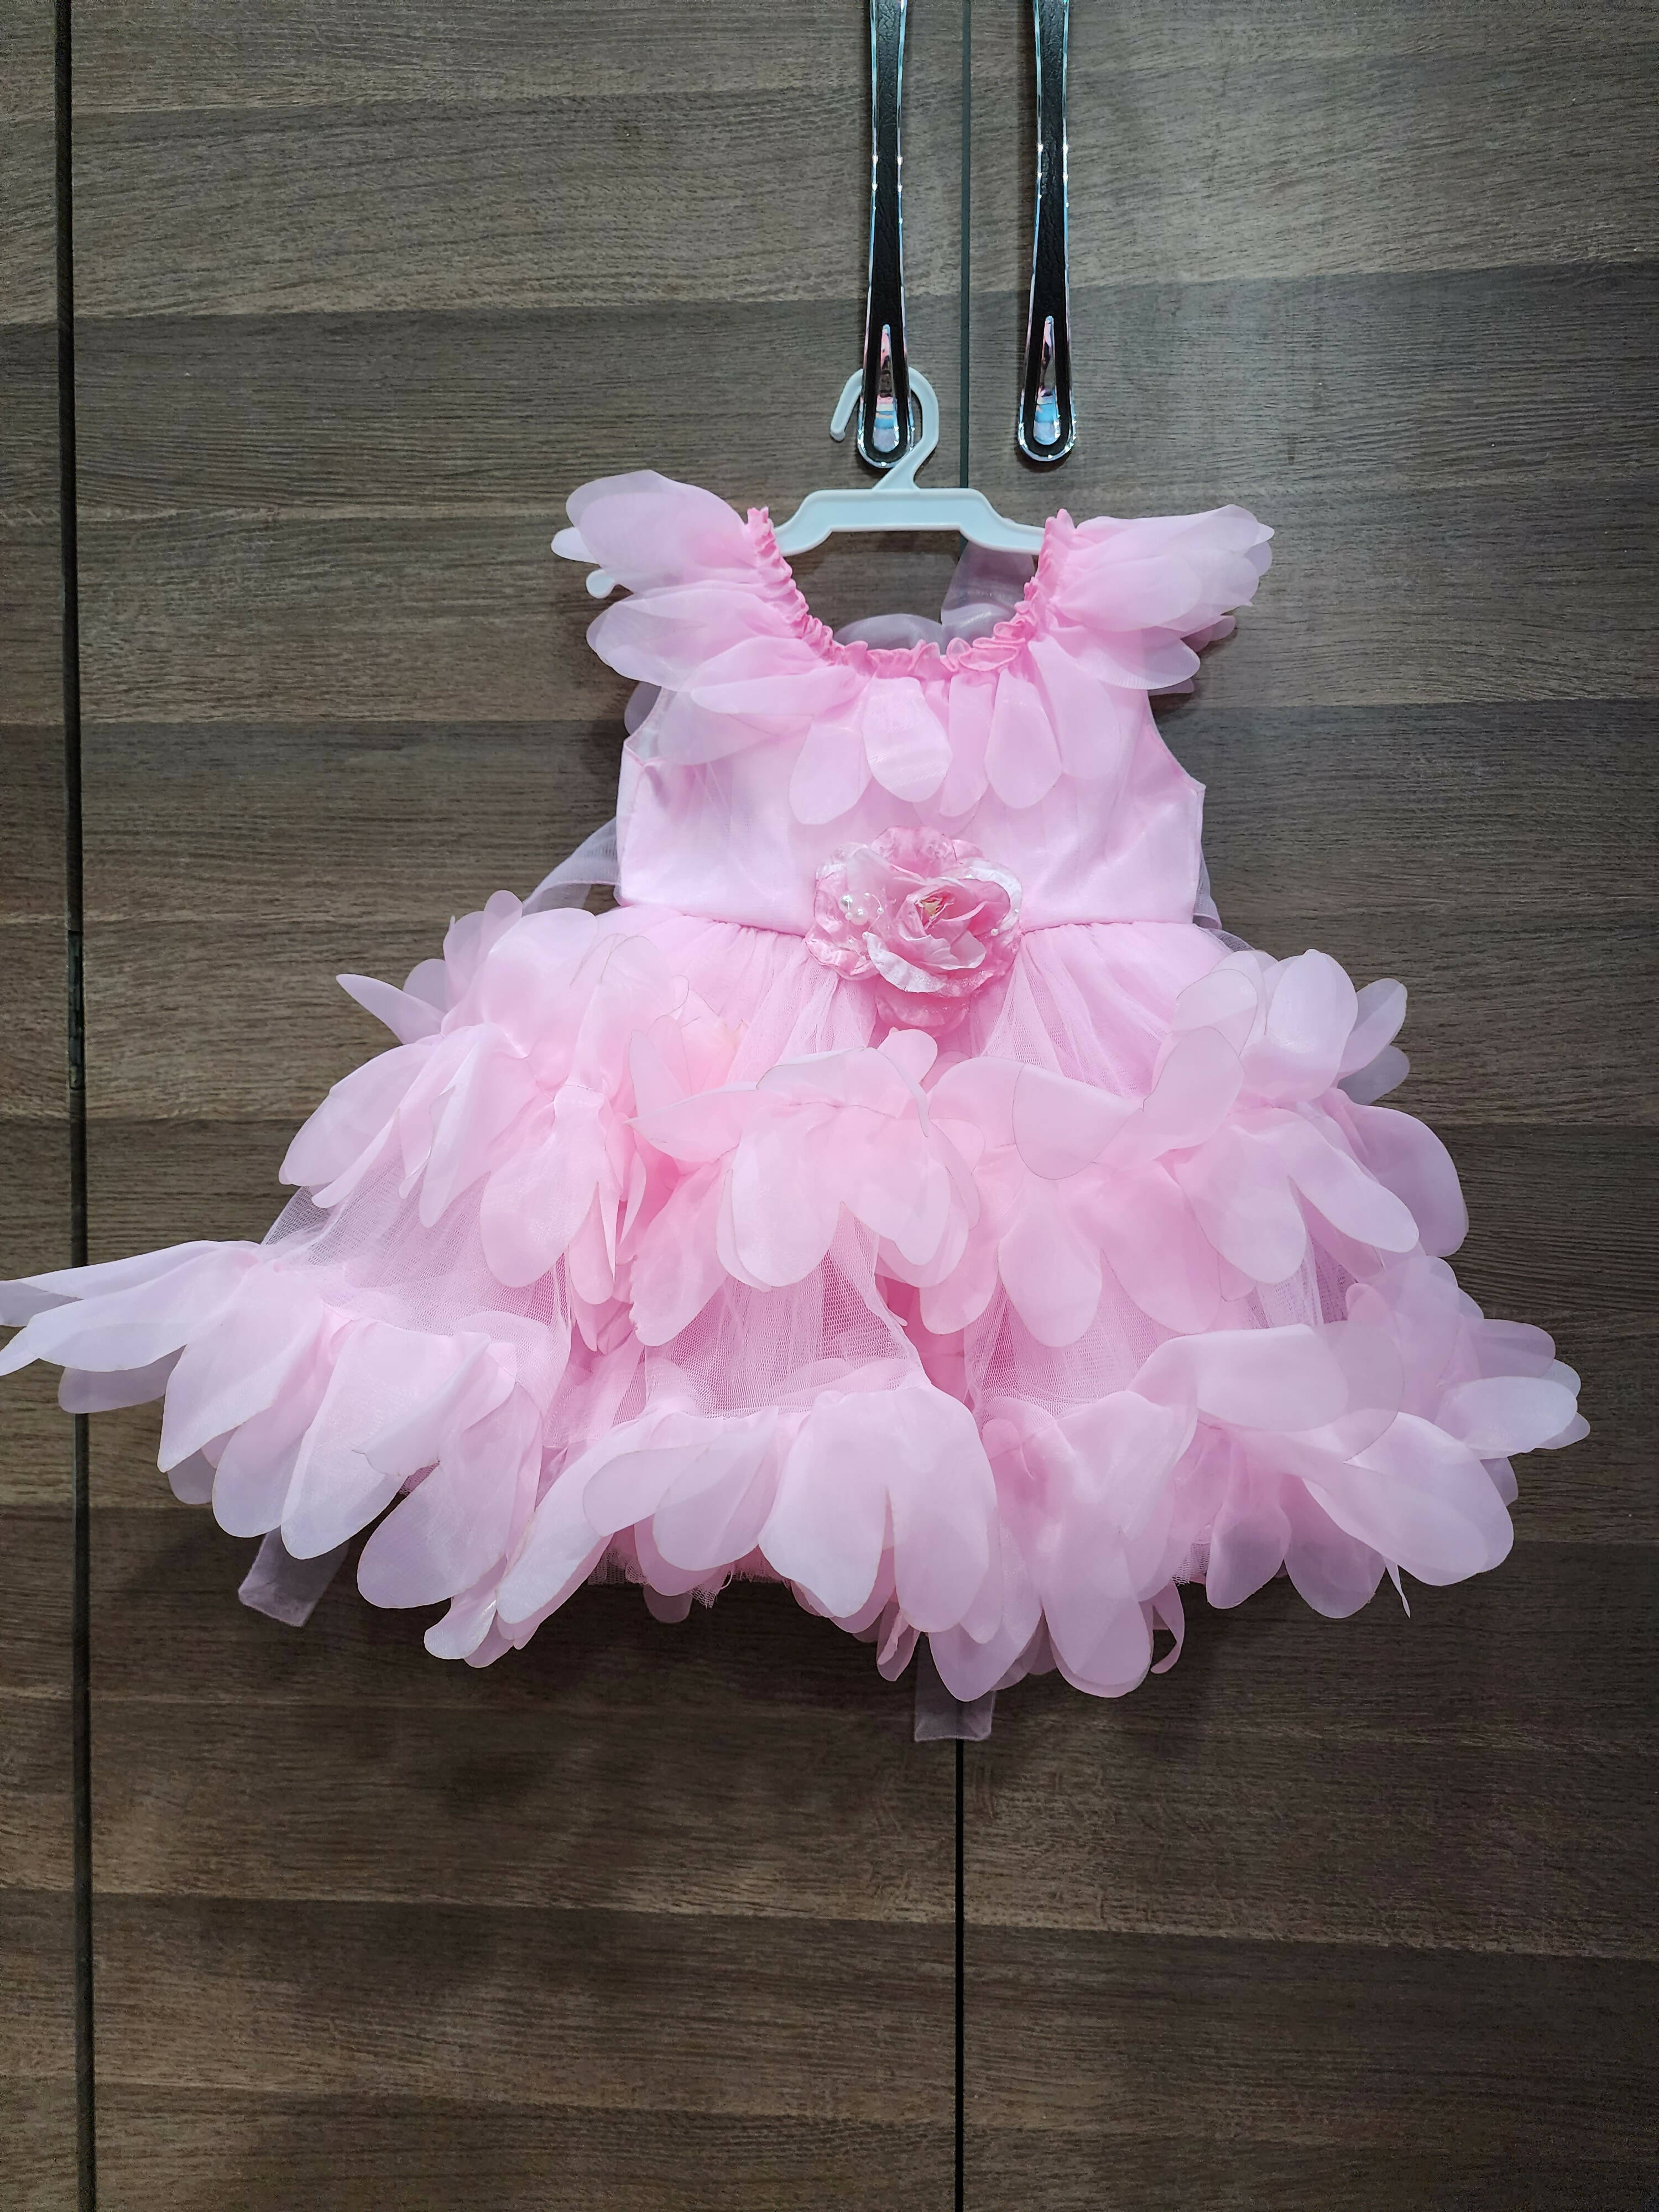 Pink party frock - 1st Birthday Frock